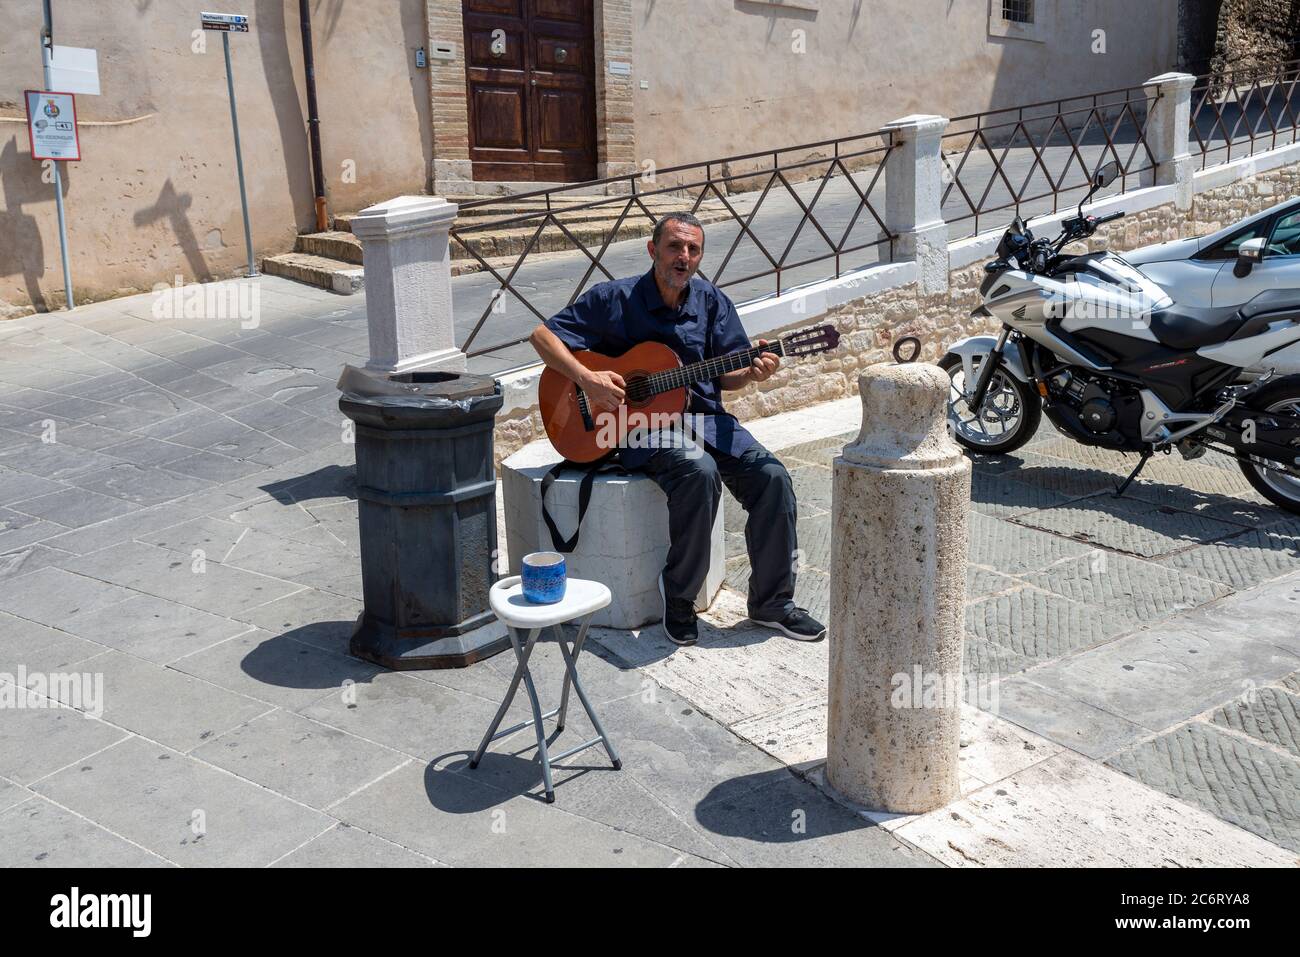 assisi,italy july 11 2020:a street artist with a guitar in the sun Stock Photo